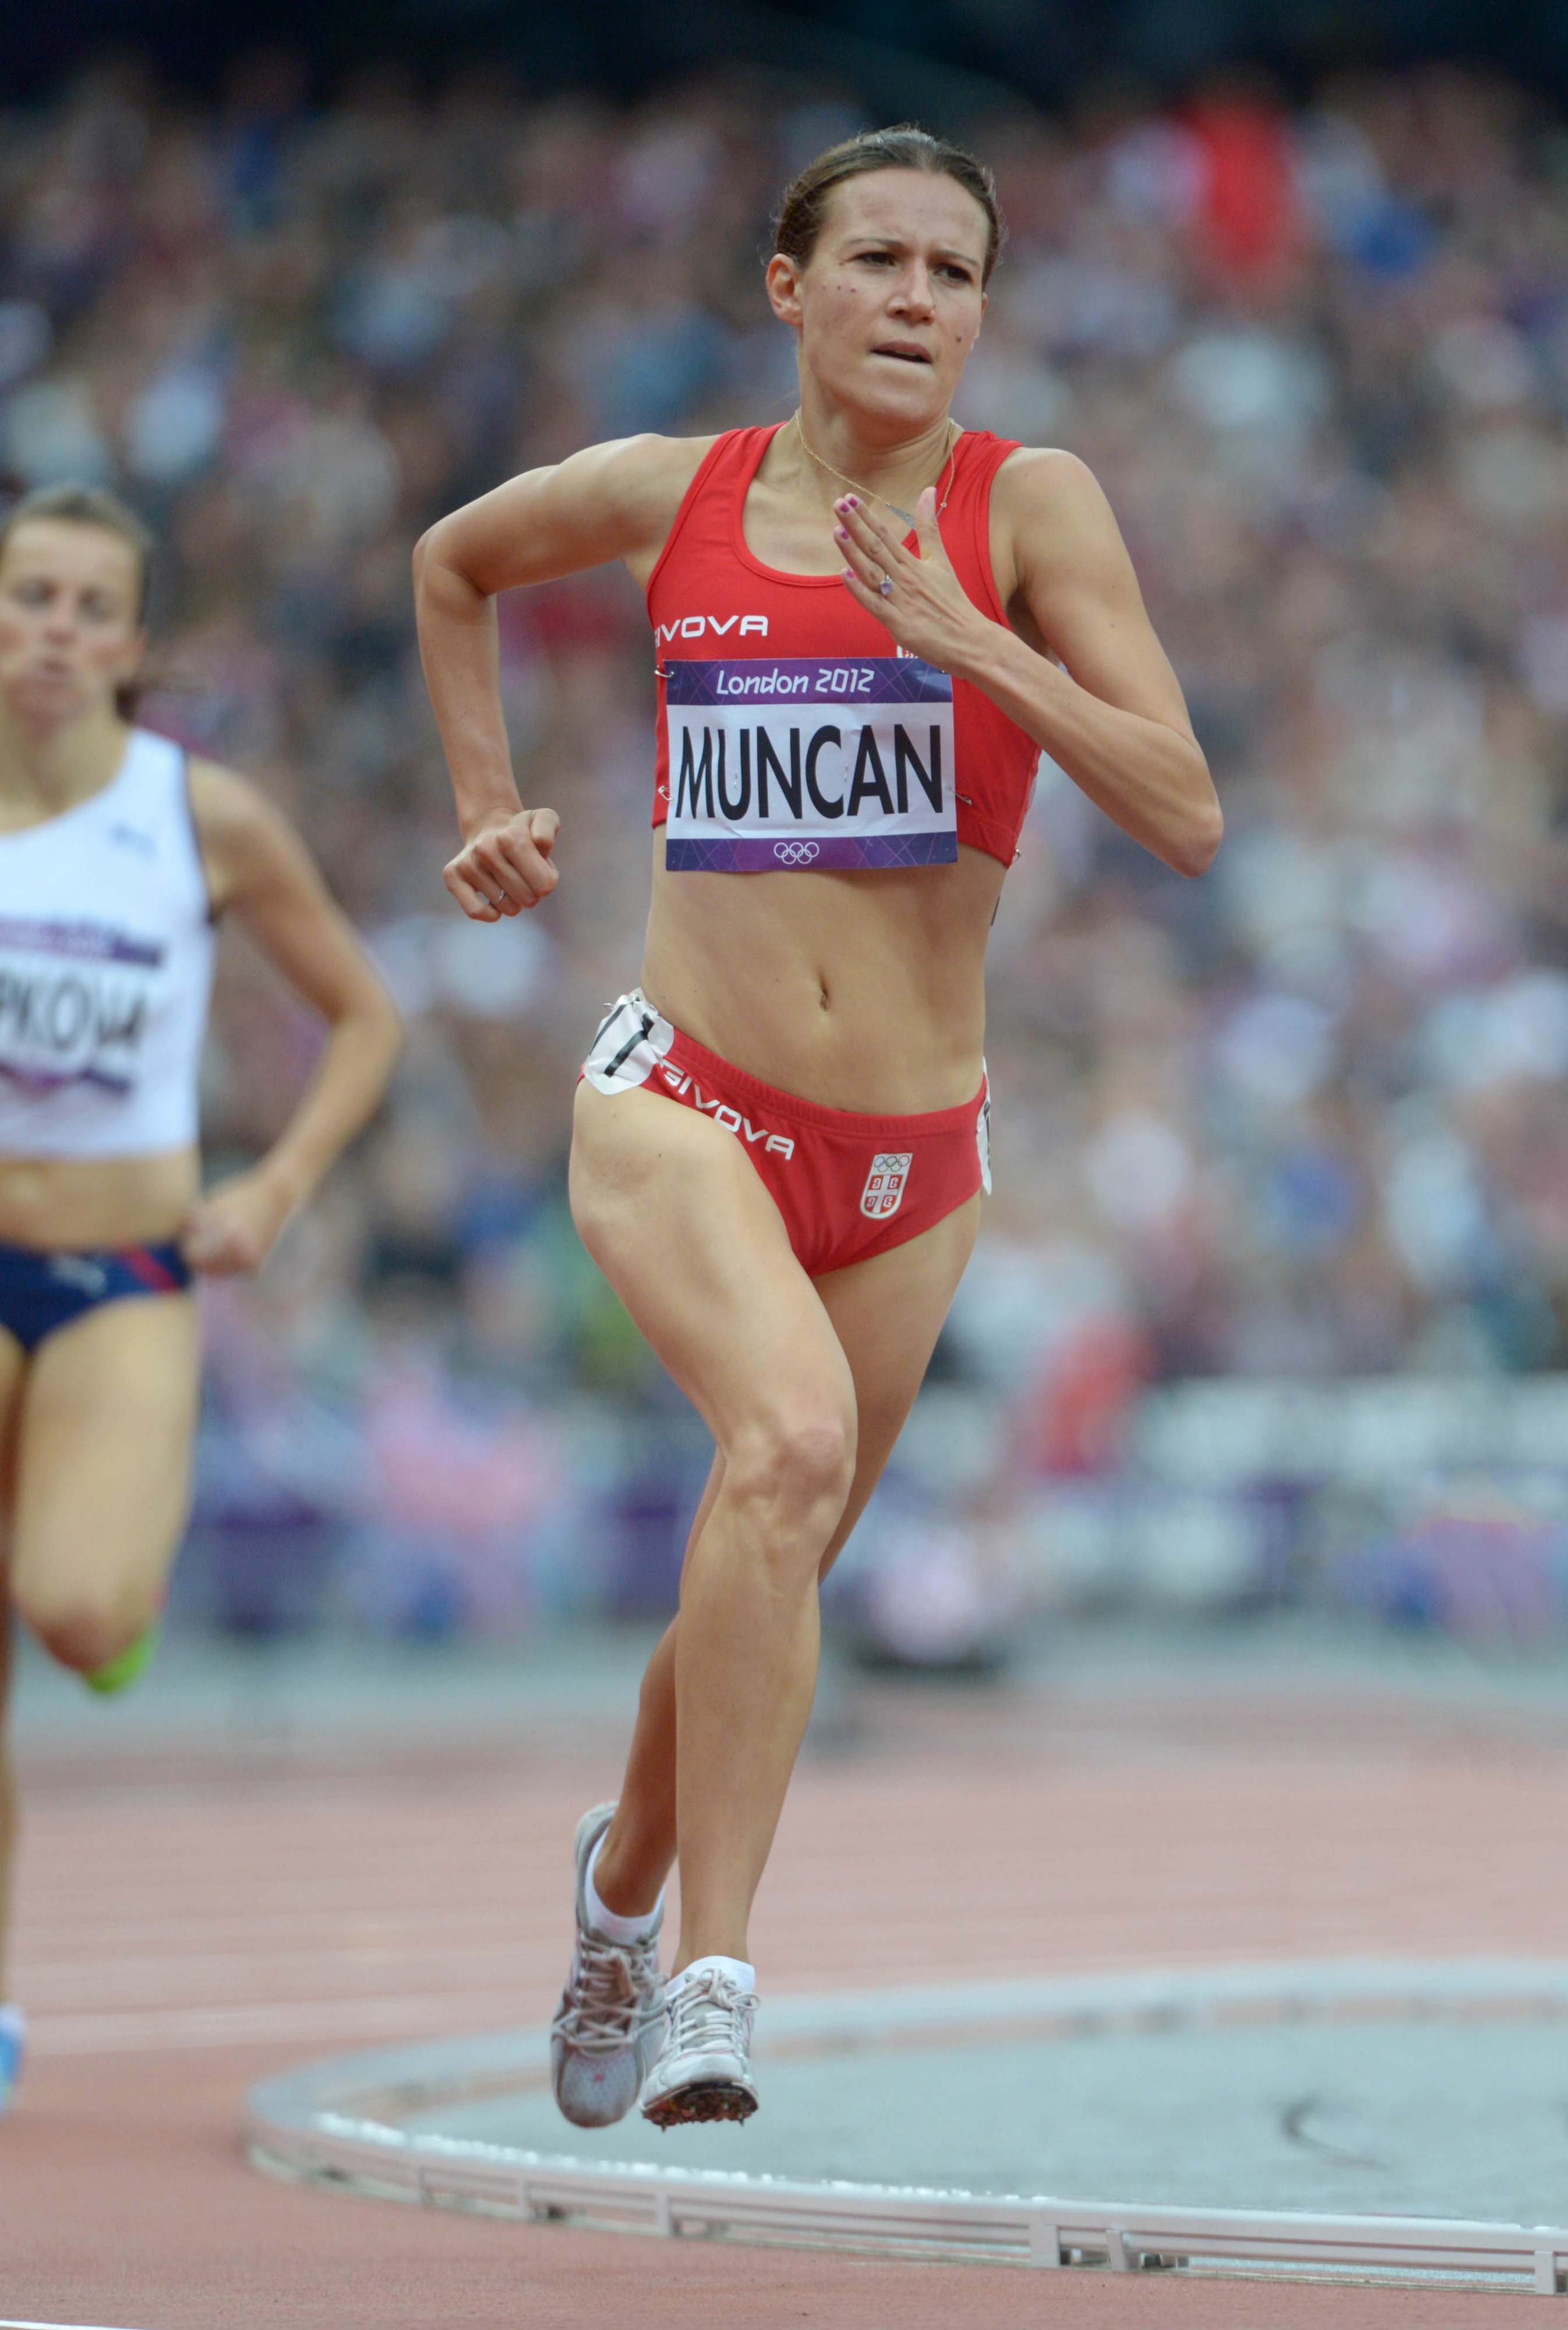 Aug 6, 2012; London, United Kingdom; Marina Muncan (SRB) runs 4:11.25 in a womens 1,500m heat during the London 2012 Olympic Games at Olympic Stadium. Mandatory Credit: Kirby Lee-USA TODAY Sports